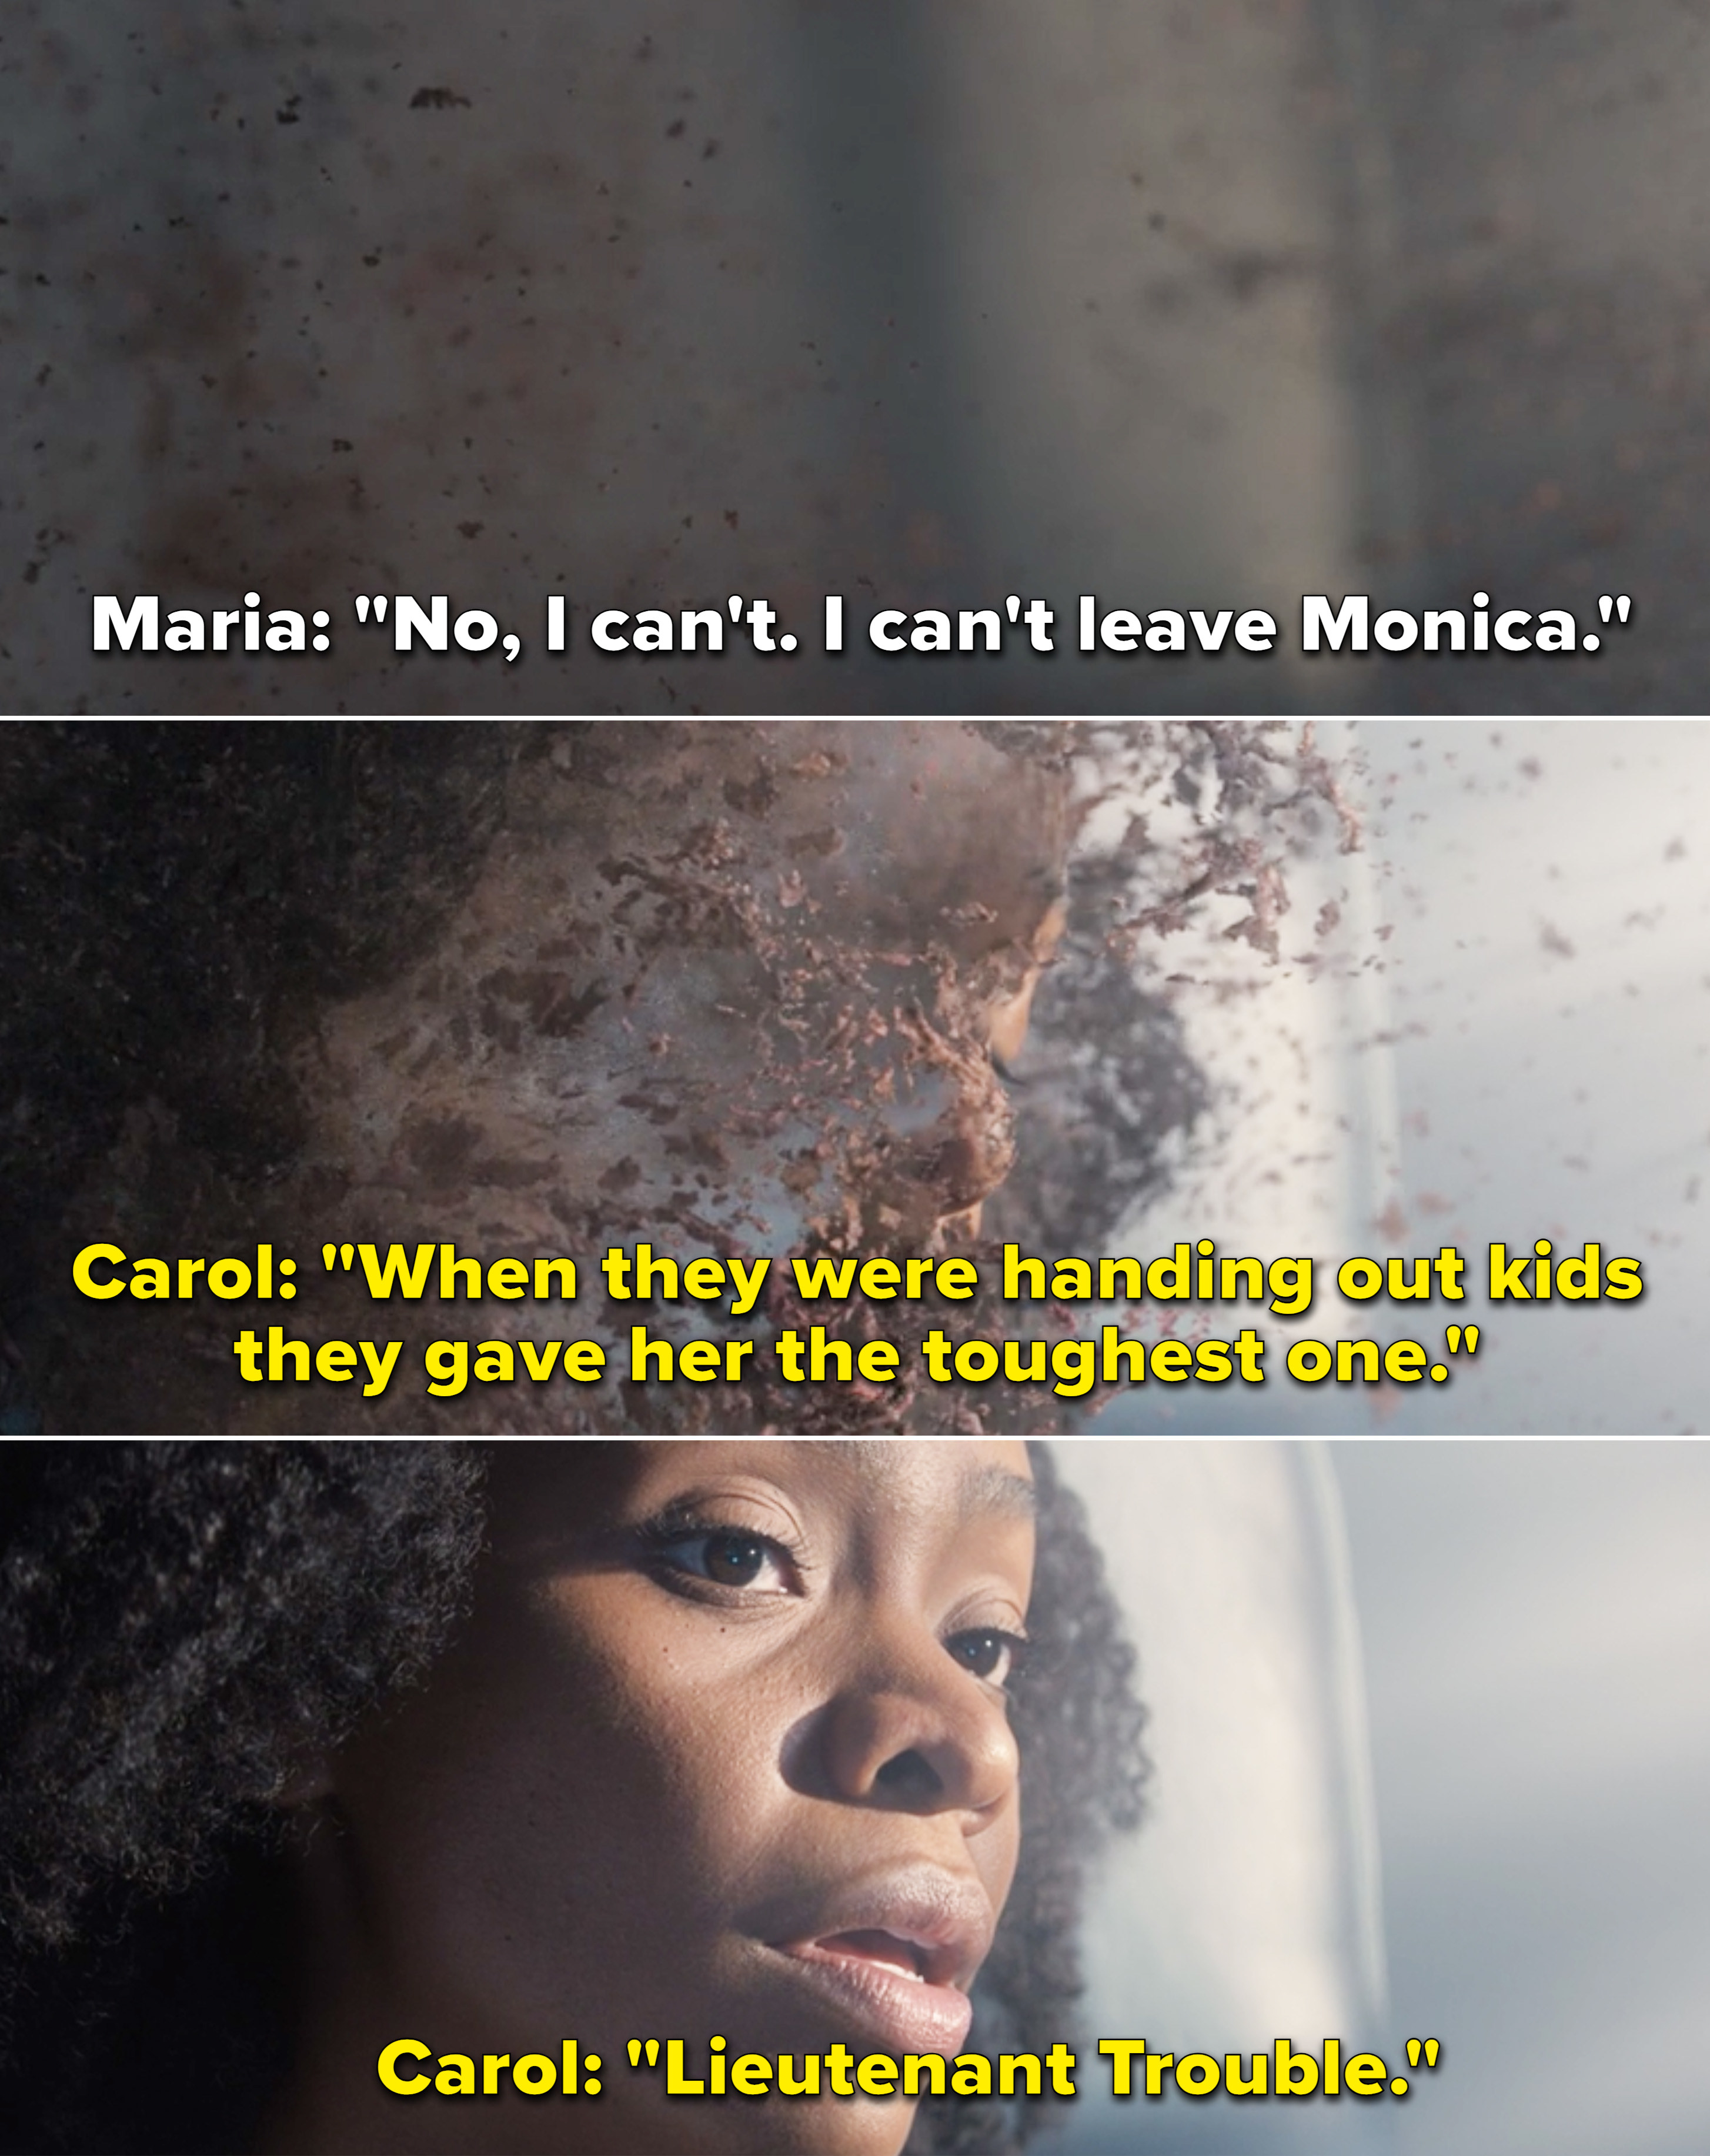 Maria saying, &quot;No, I can&#x27;t. I can&#x27;t leave Monica&quot; and Carol saying, &quot;When they were handing out kids they gave her the toughest one. Lieutenant Trouble&quot;